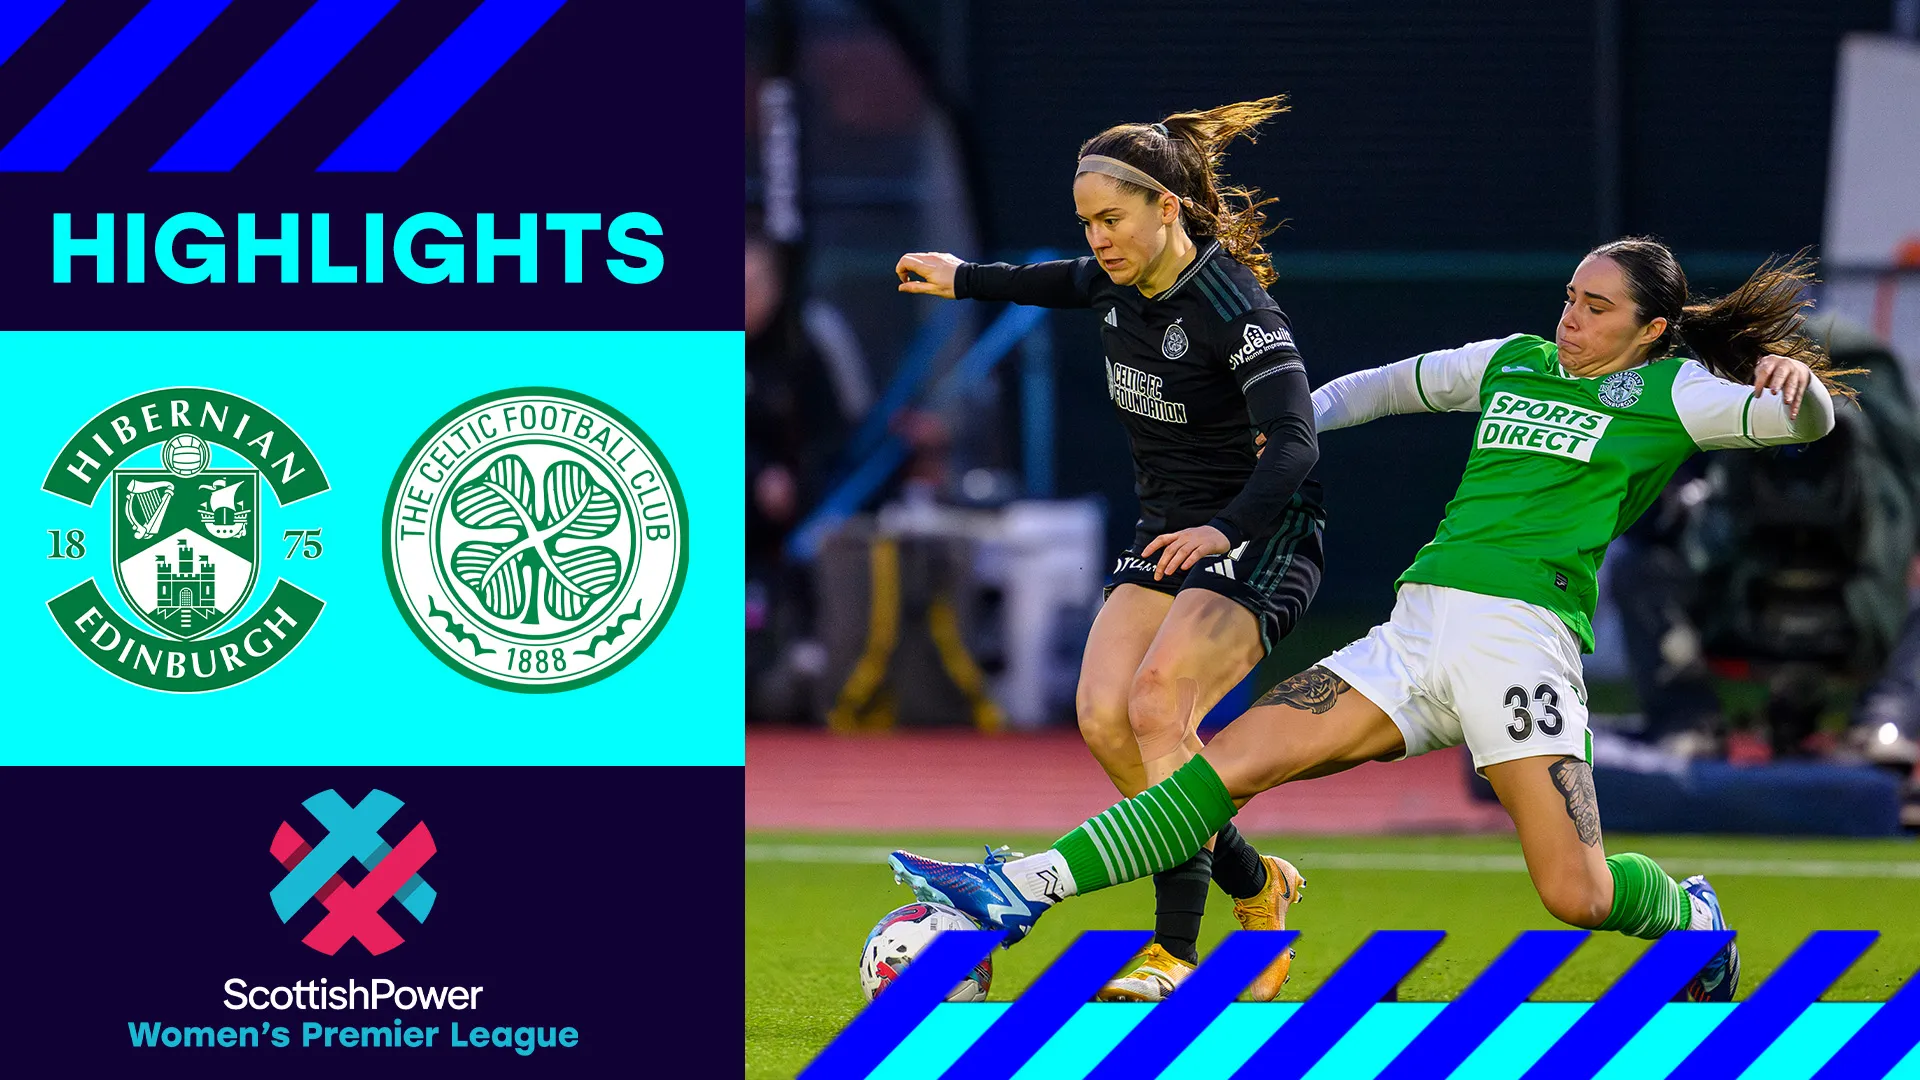 Image for Hibernian 1-3 Celtic | Celtic close gap to the top of the table with victory over Hibs | SWPL